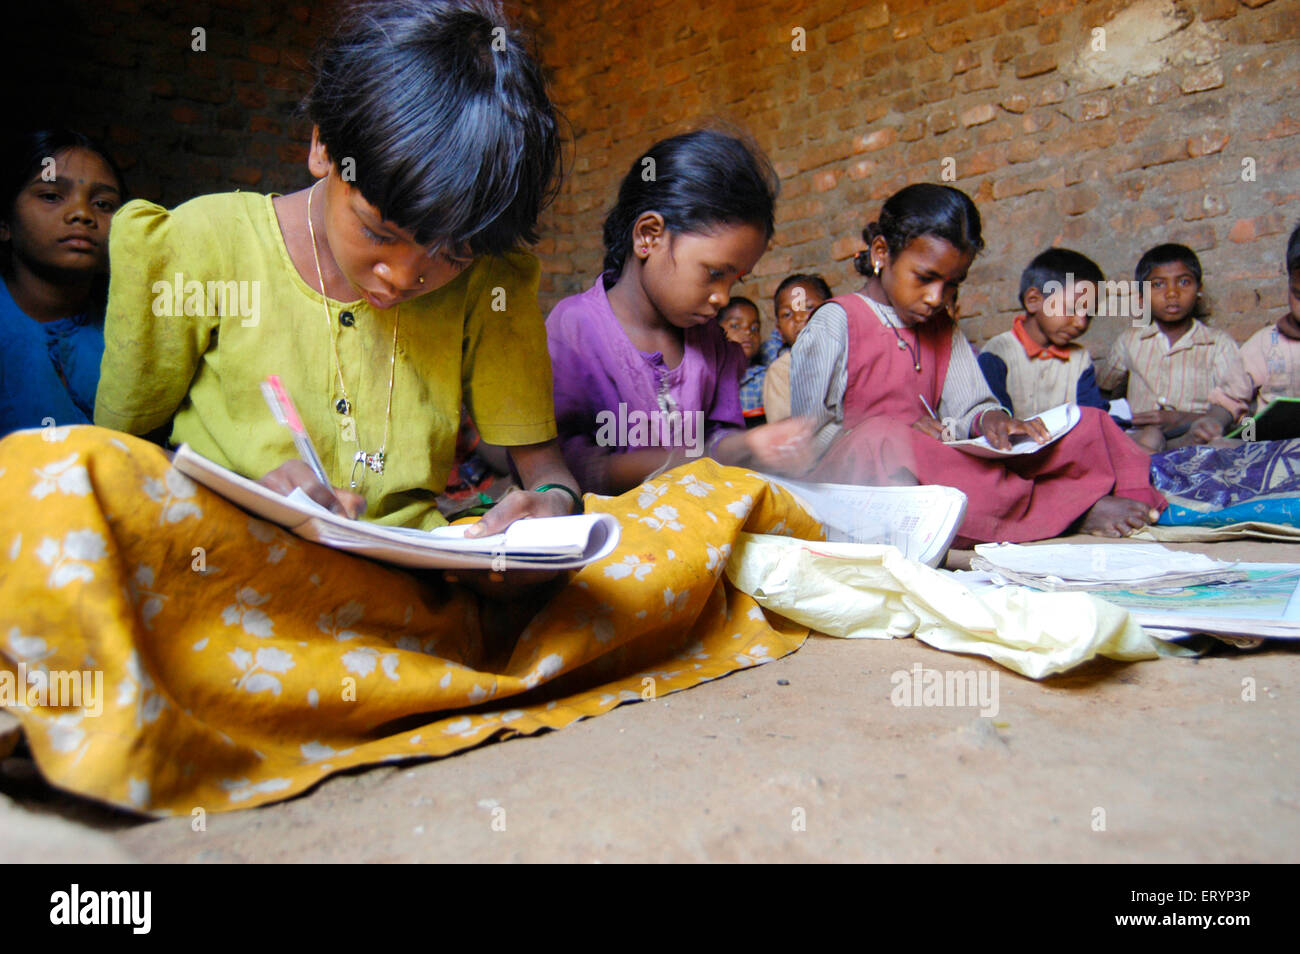 Tribal children girls and boys learning in school run by NGO Non Government Organization in village sitting on floor India Asia Stock Photo